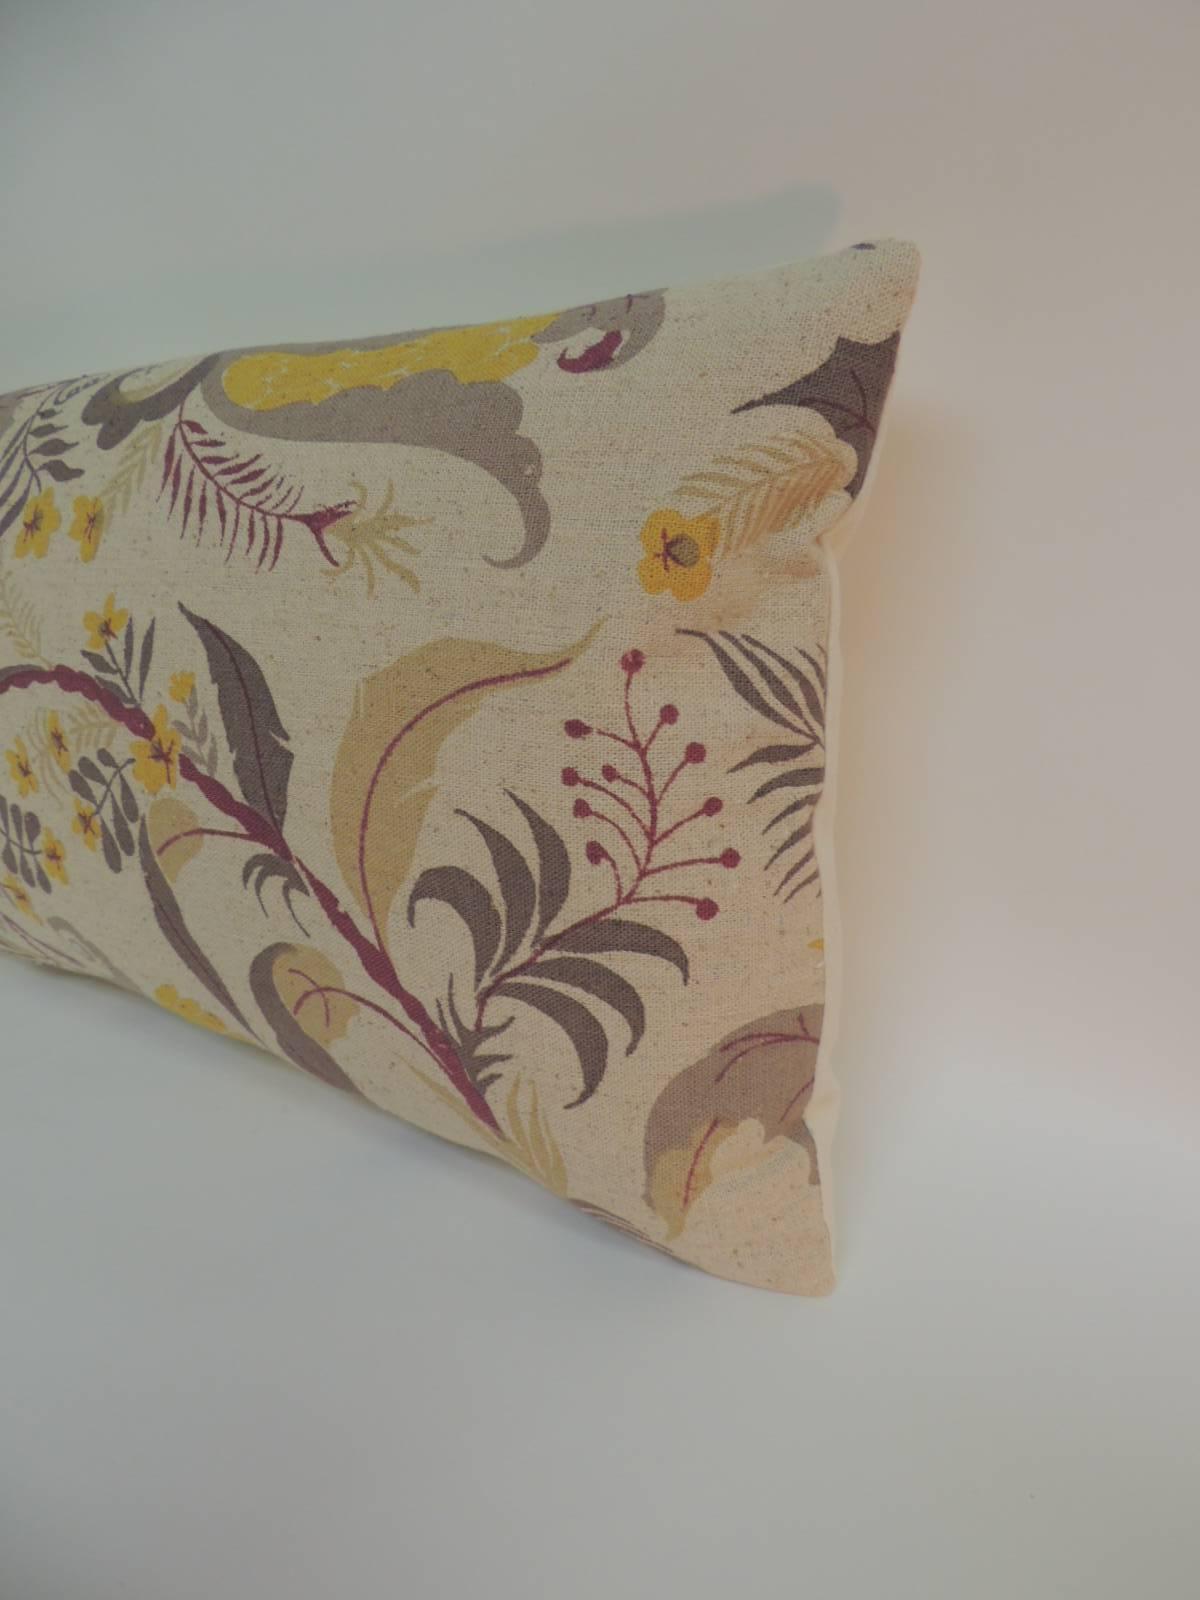 Vintage French floral printed linen decorative bolster with natural linen backing.
In shades of yellow, red, green, gold, brown and grey. Throw vintage pillows handcrafted and designed in the USA. Closure by stitch (no zipper) with a custom made